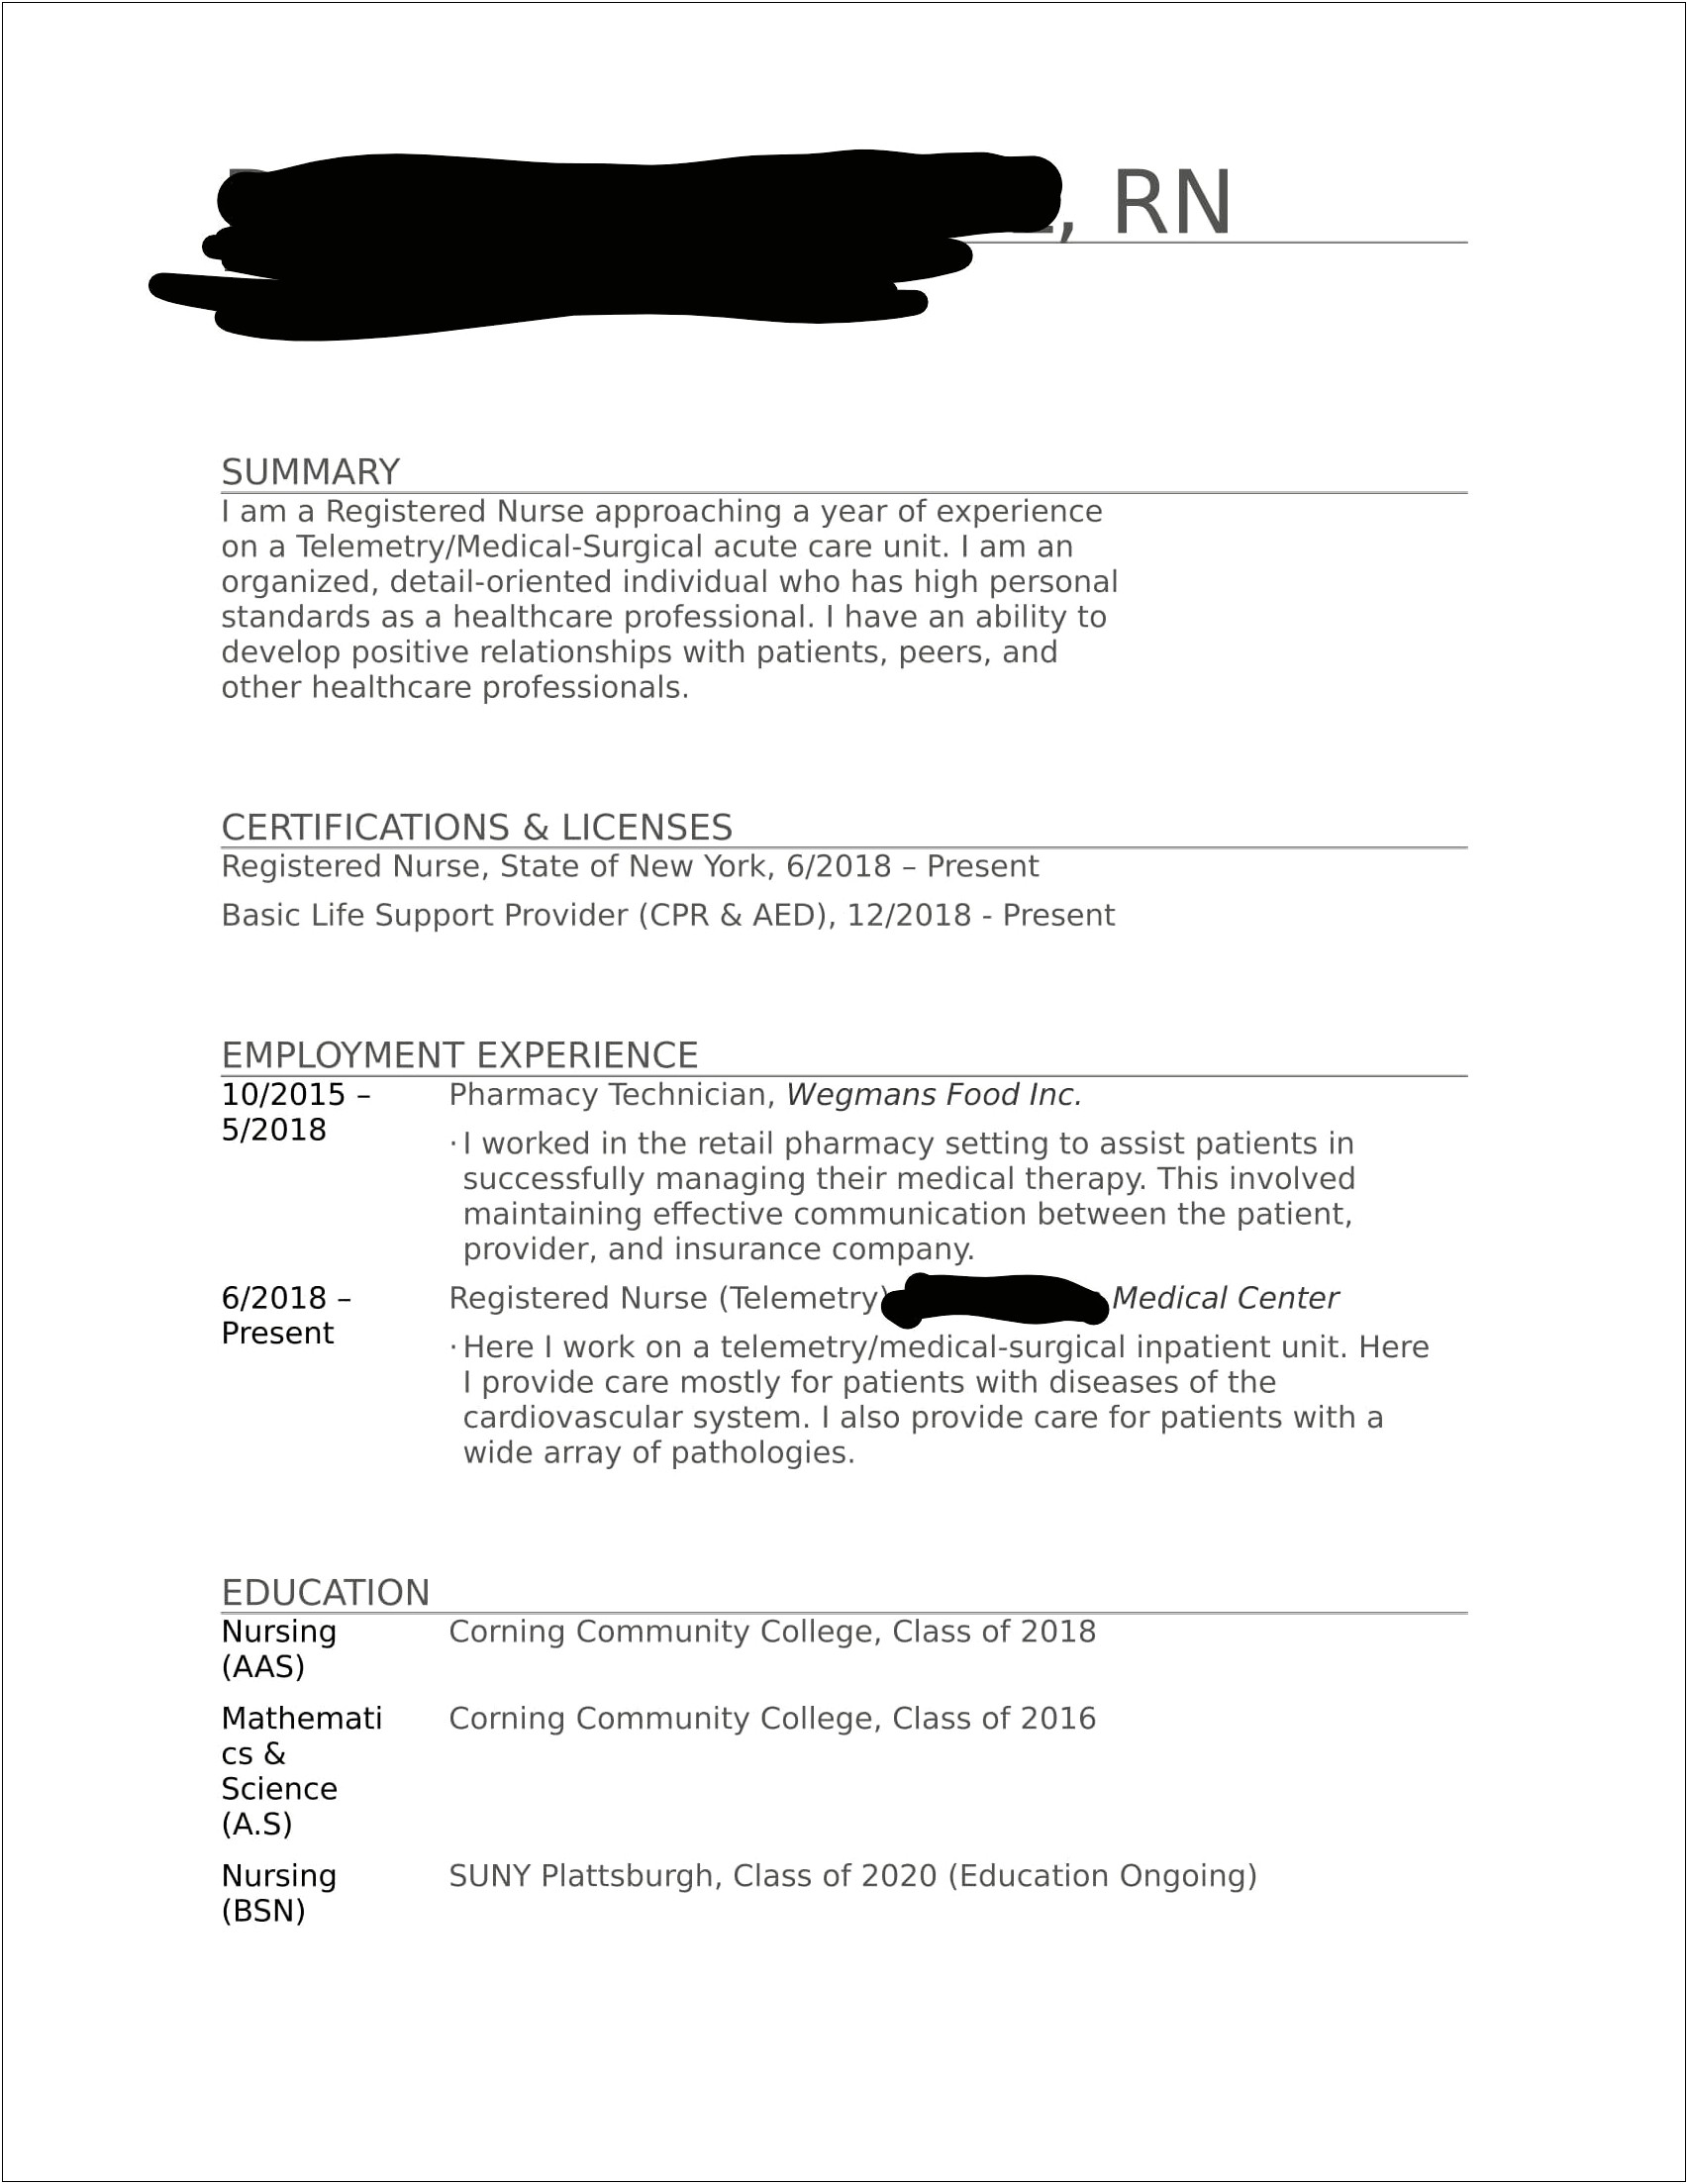 Nurse Resume With 1 Year Of Experience